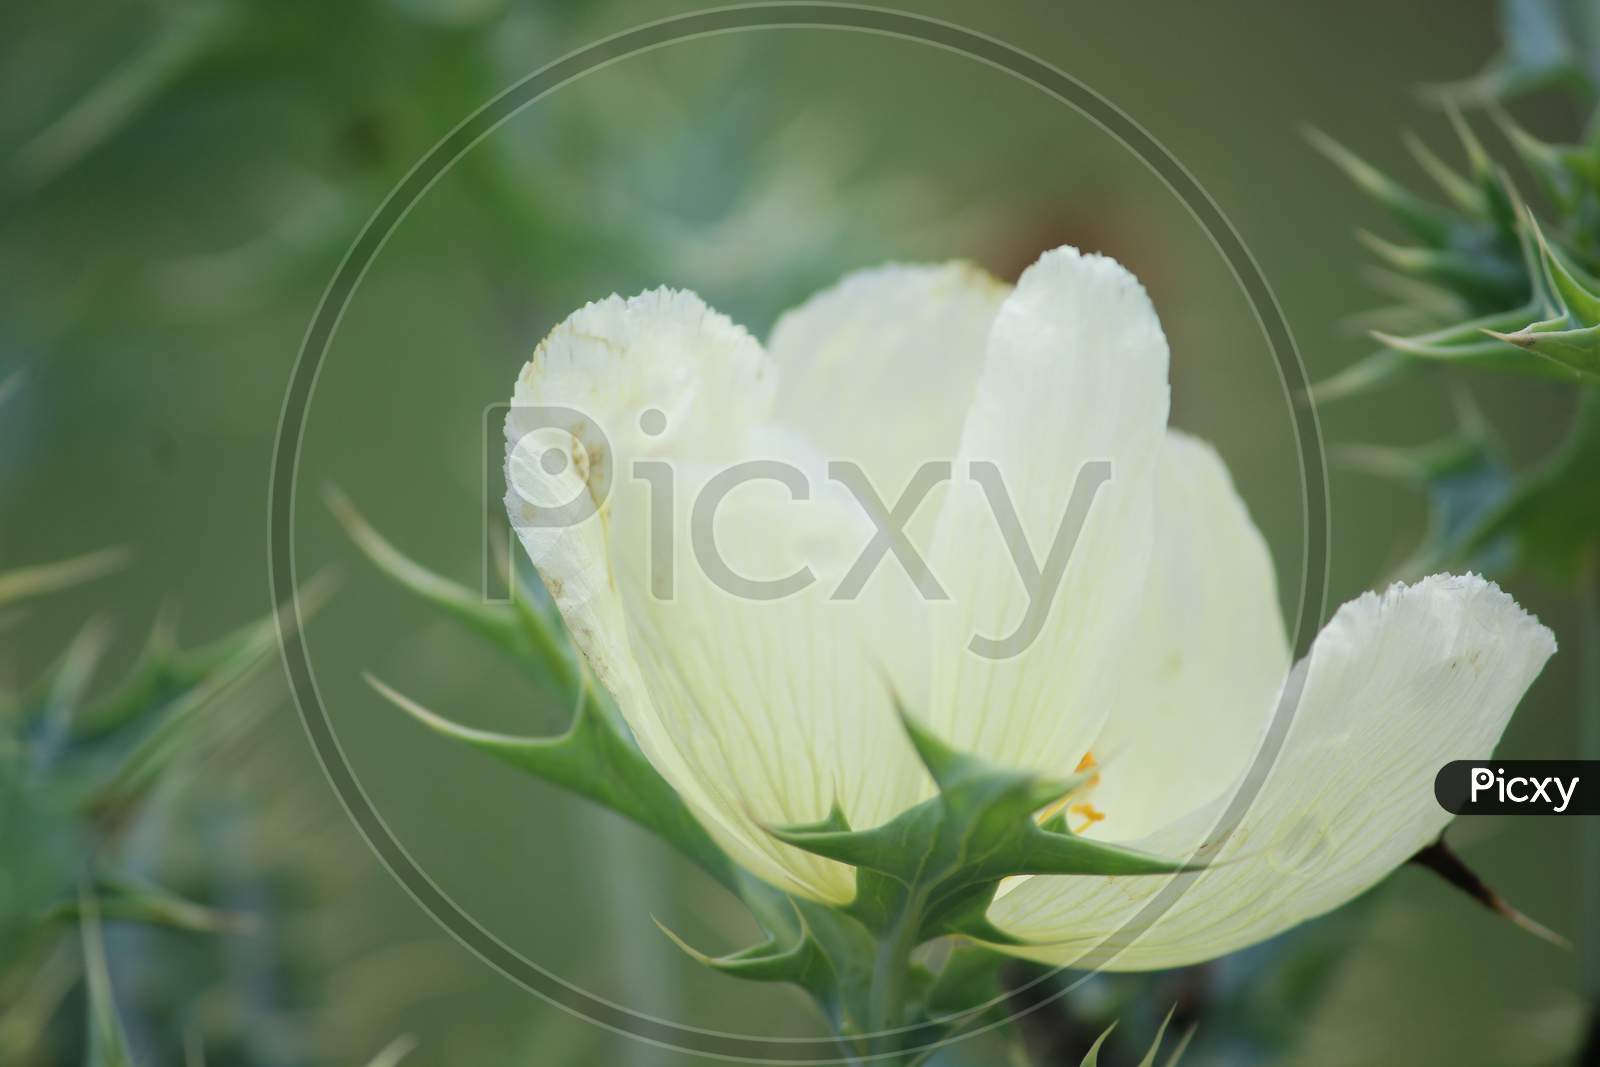 The very beautiful white and yellow mix petal flower.